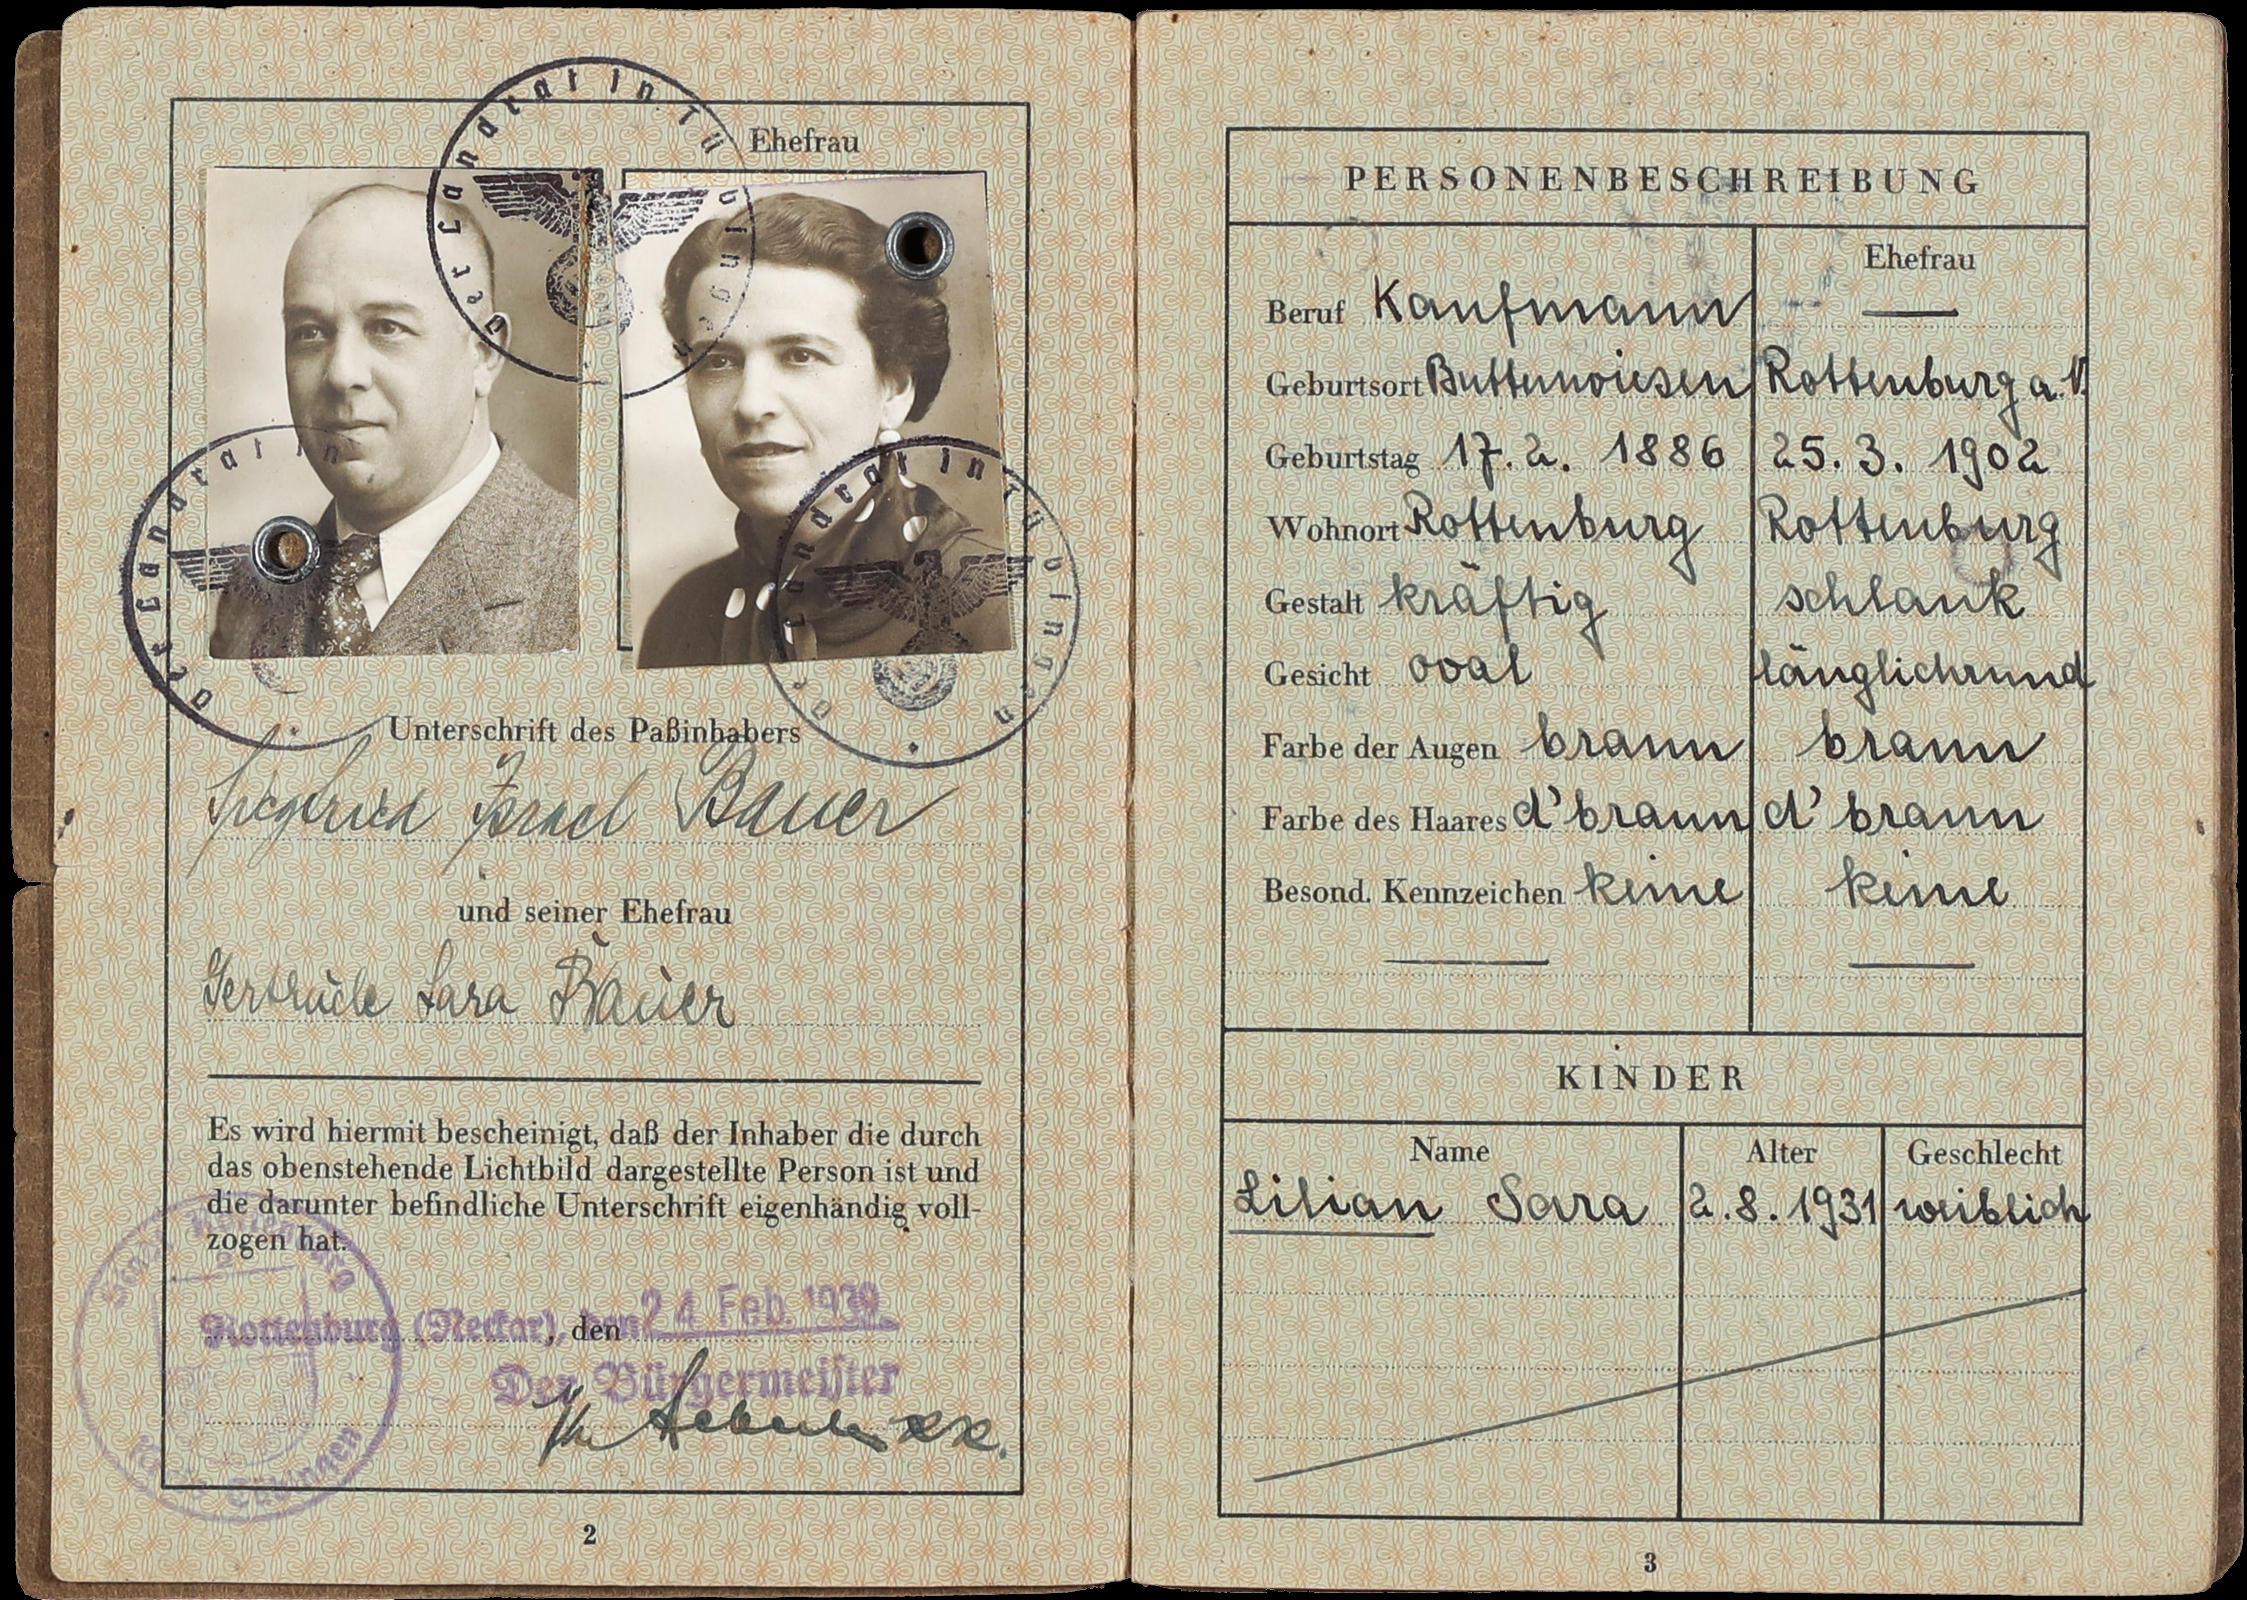 Passport for Siegfried and Gertrude Bauer from 1939. They had to wear the additional forced names Israel and Sara.